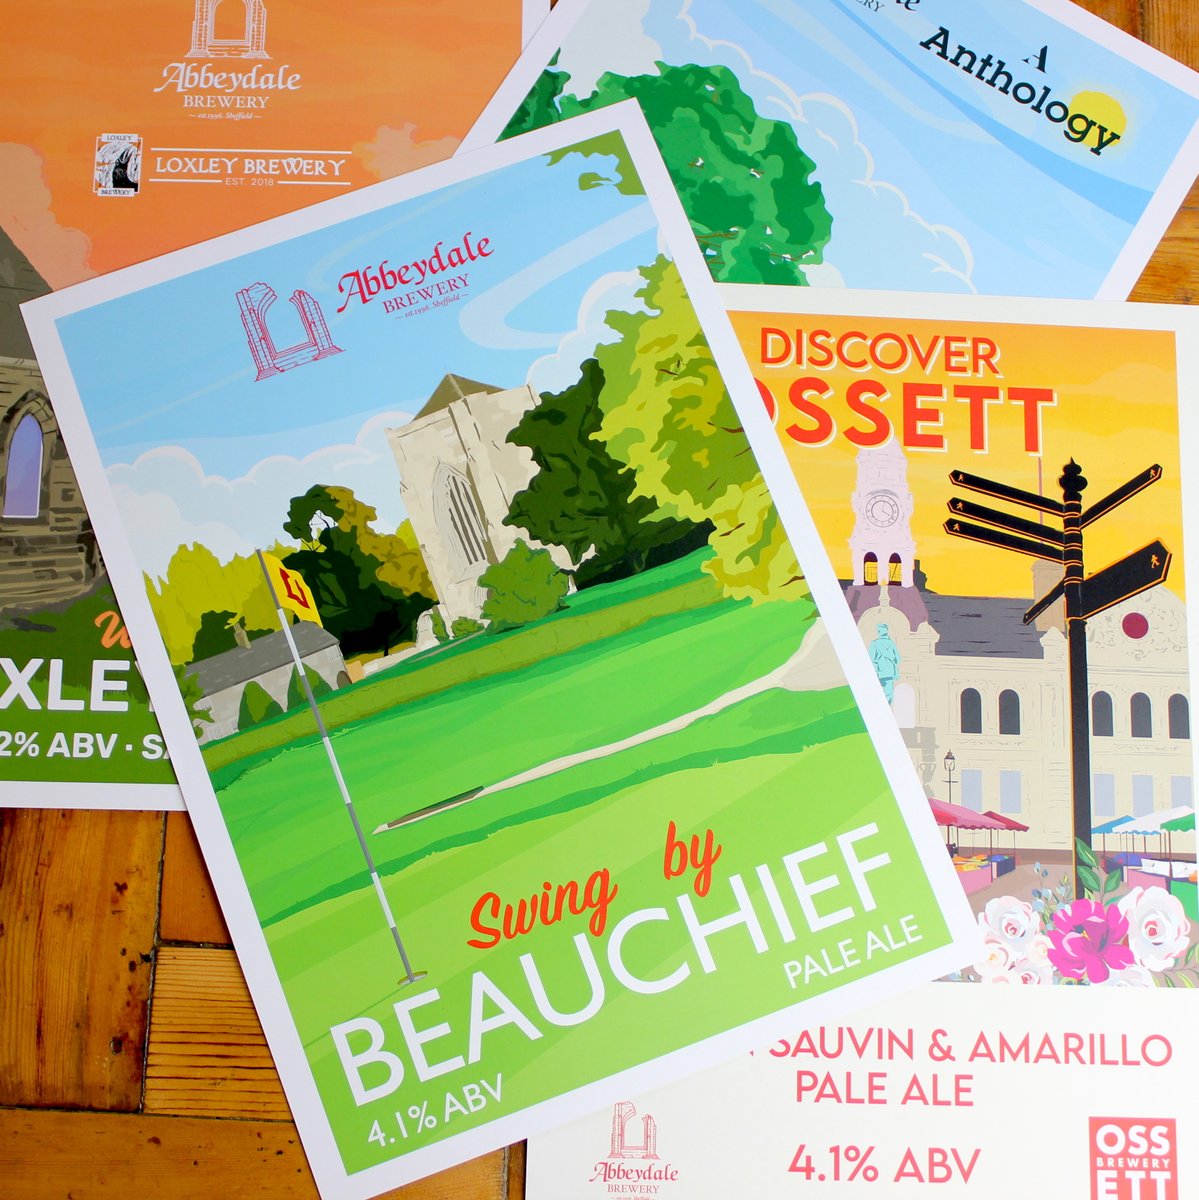 See Britain by ale! Ahead of the latest release from our beautiful Travel Poster series, we spent some time reflecting on this range - celebrating cask ale, collaboration and community. Join us on the journey here: abbeydalebrewery.co.uk/see-britain-by…